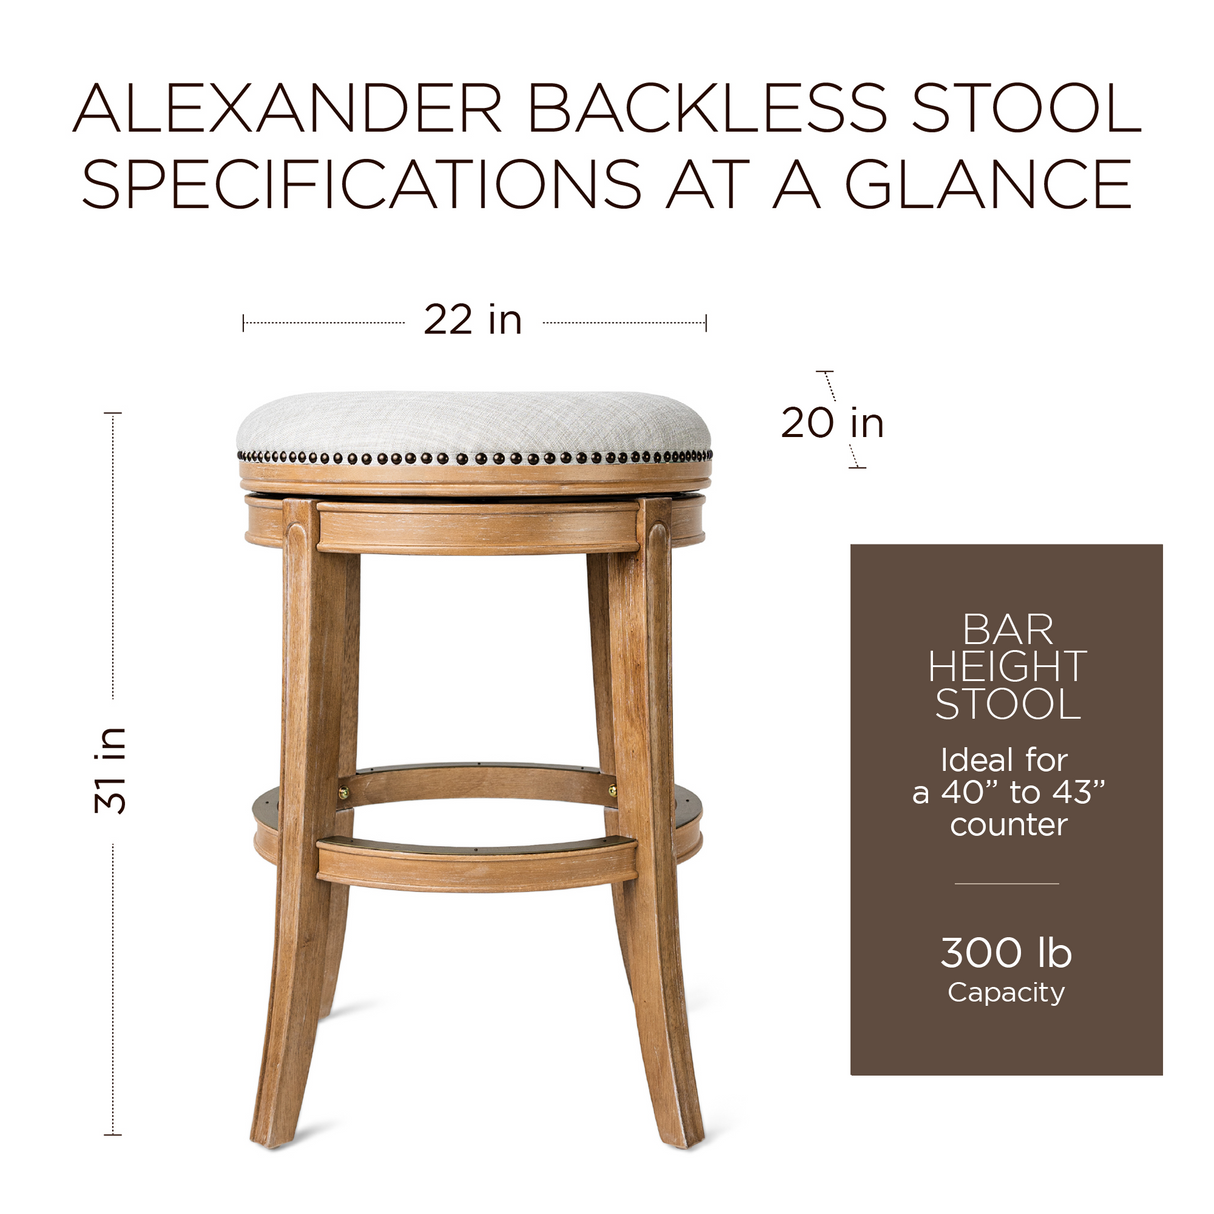 Maven Lane Alexander Backless Bar Stool in Weathered Oak Finish W/ Sand Color Fabric Upholstery